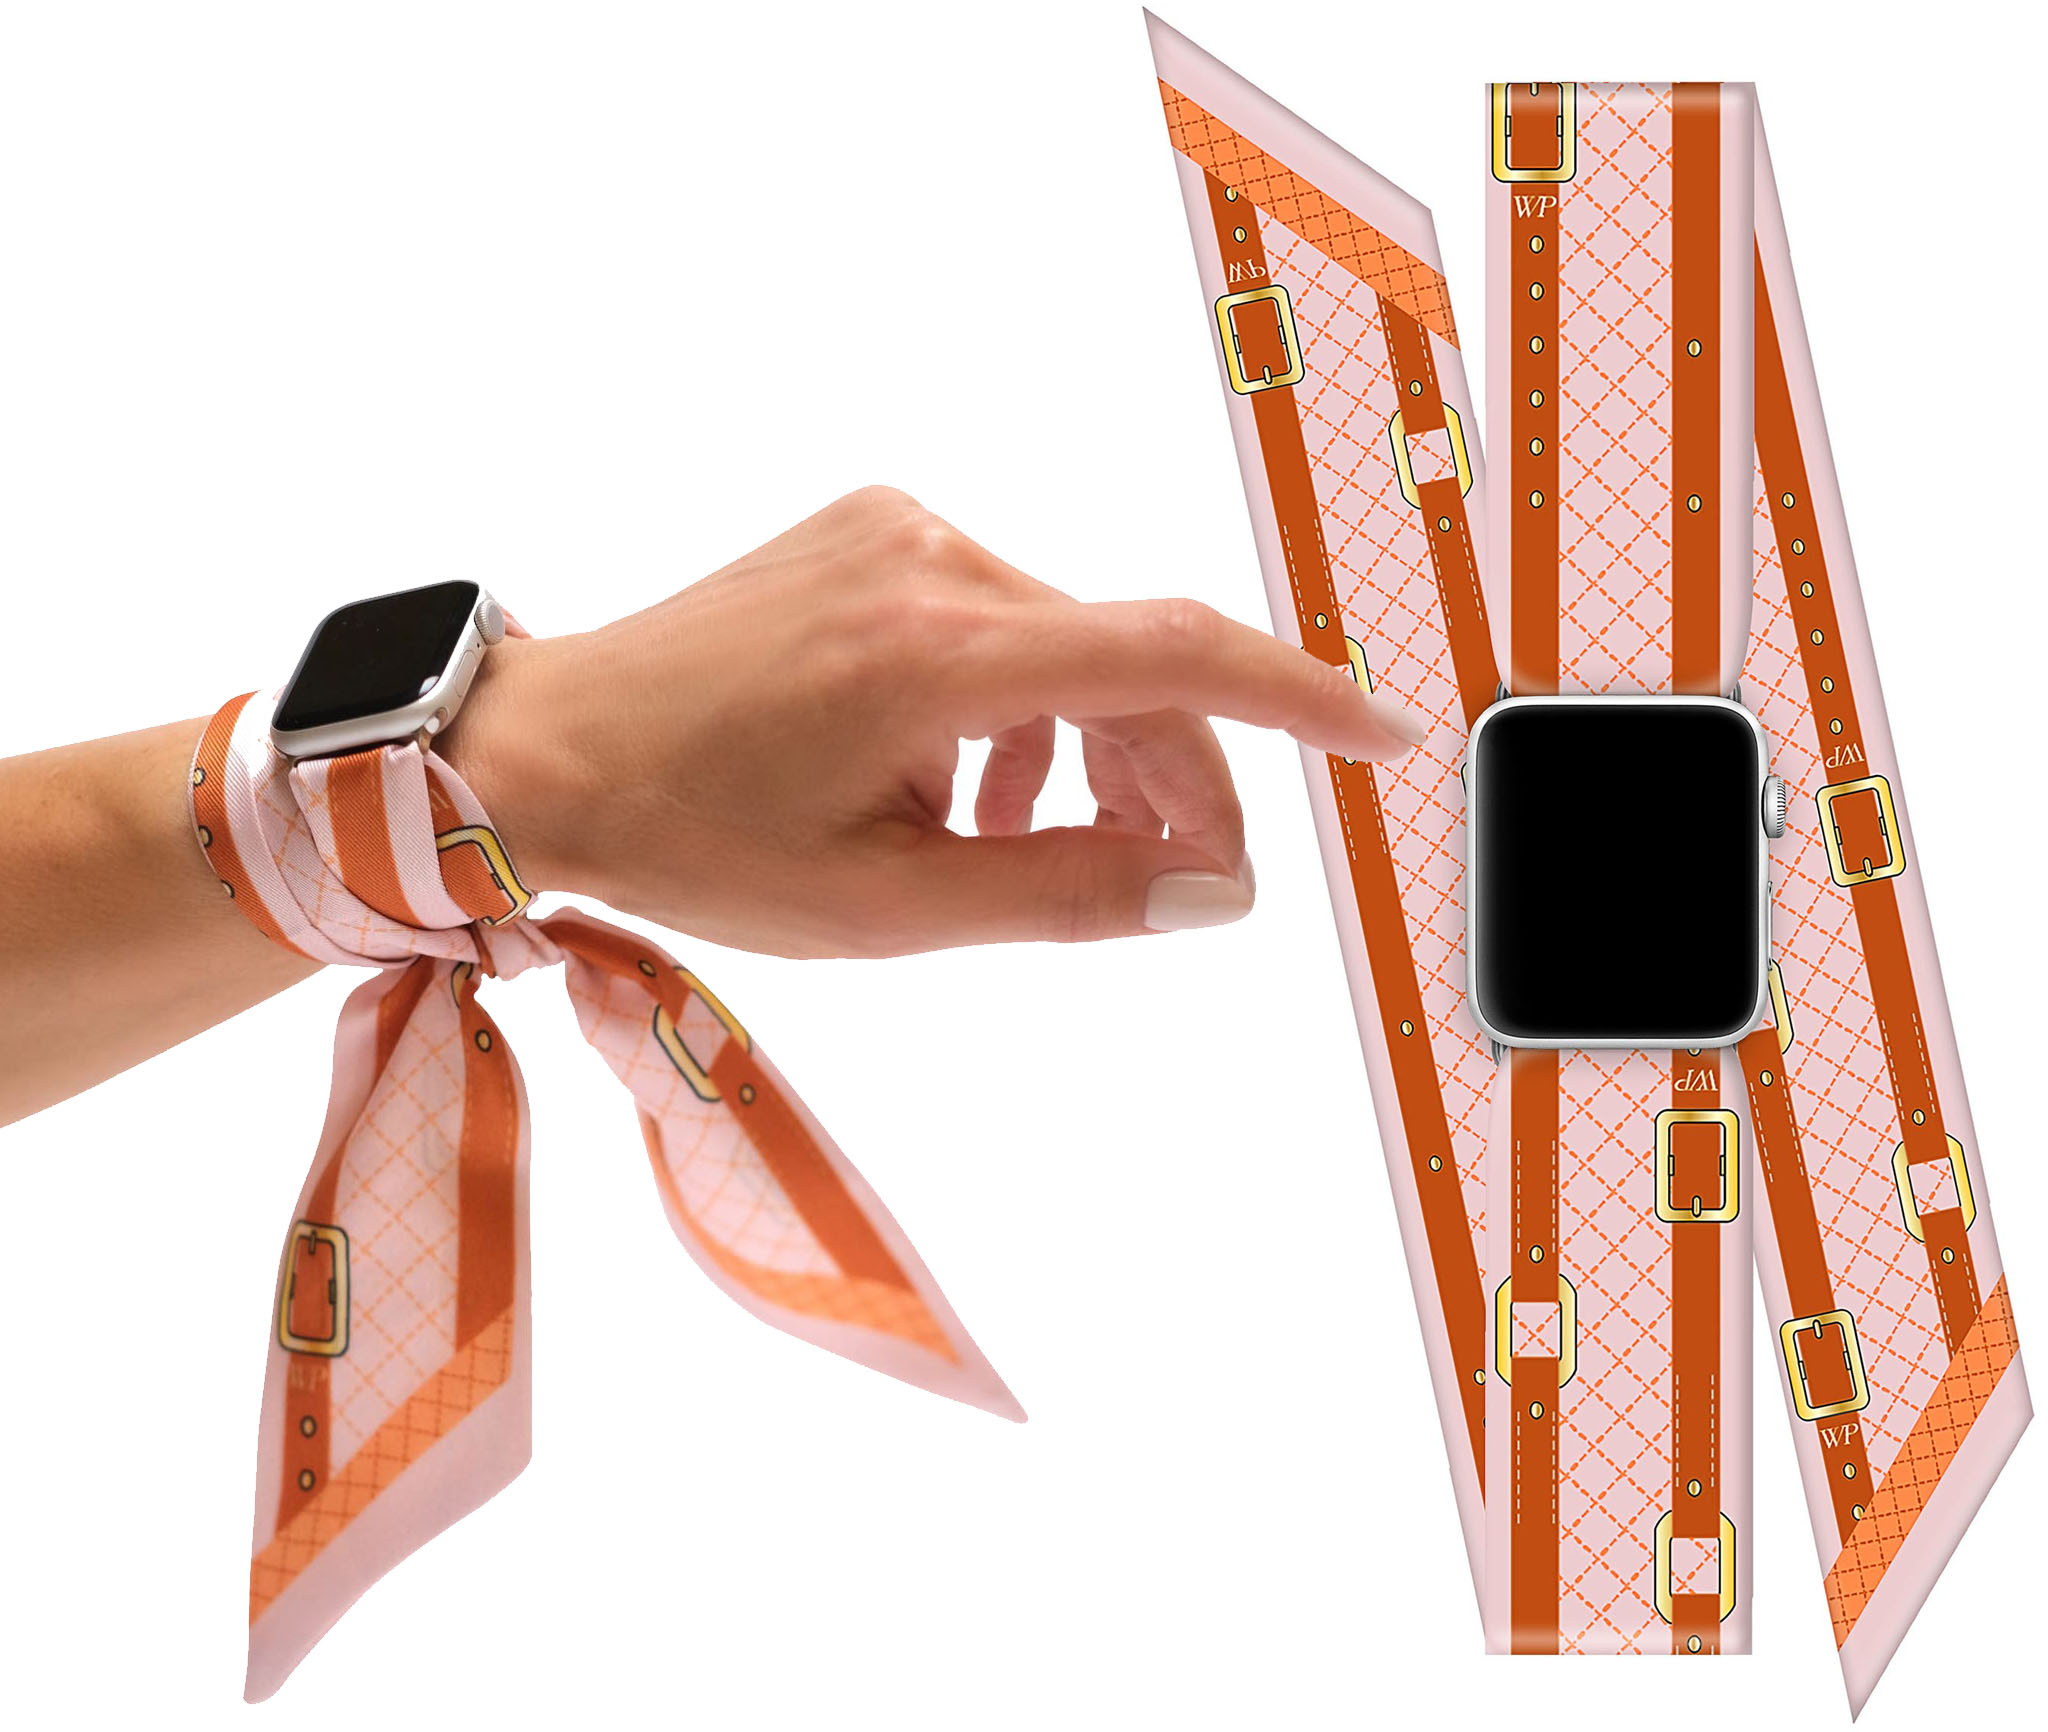 A uniquely feminine Apple Watch strap, this vintage-looking Wristpop band is made of polyester and is tied around the wrist like a scarf